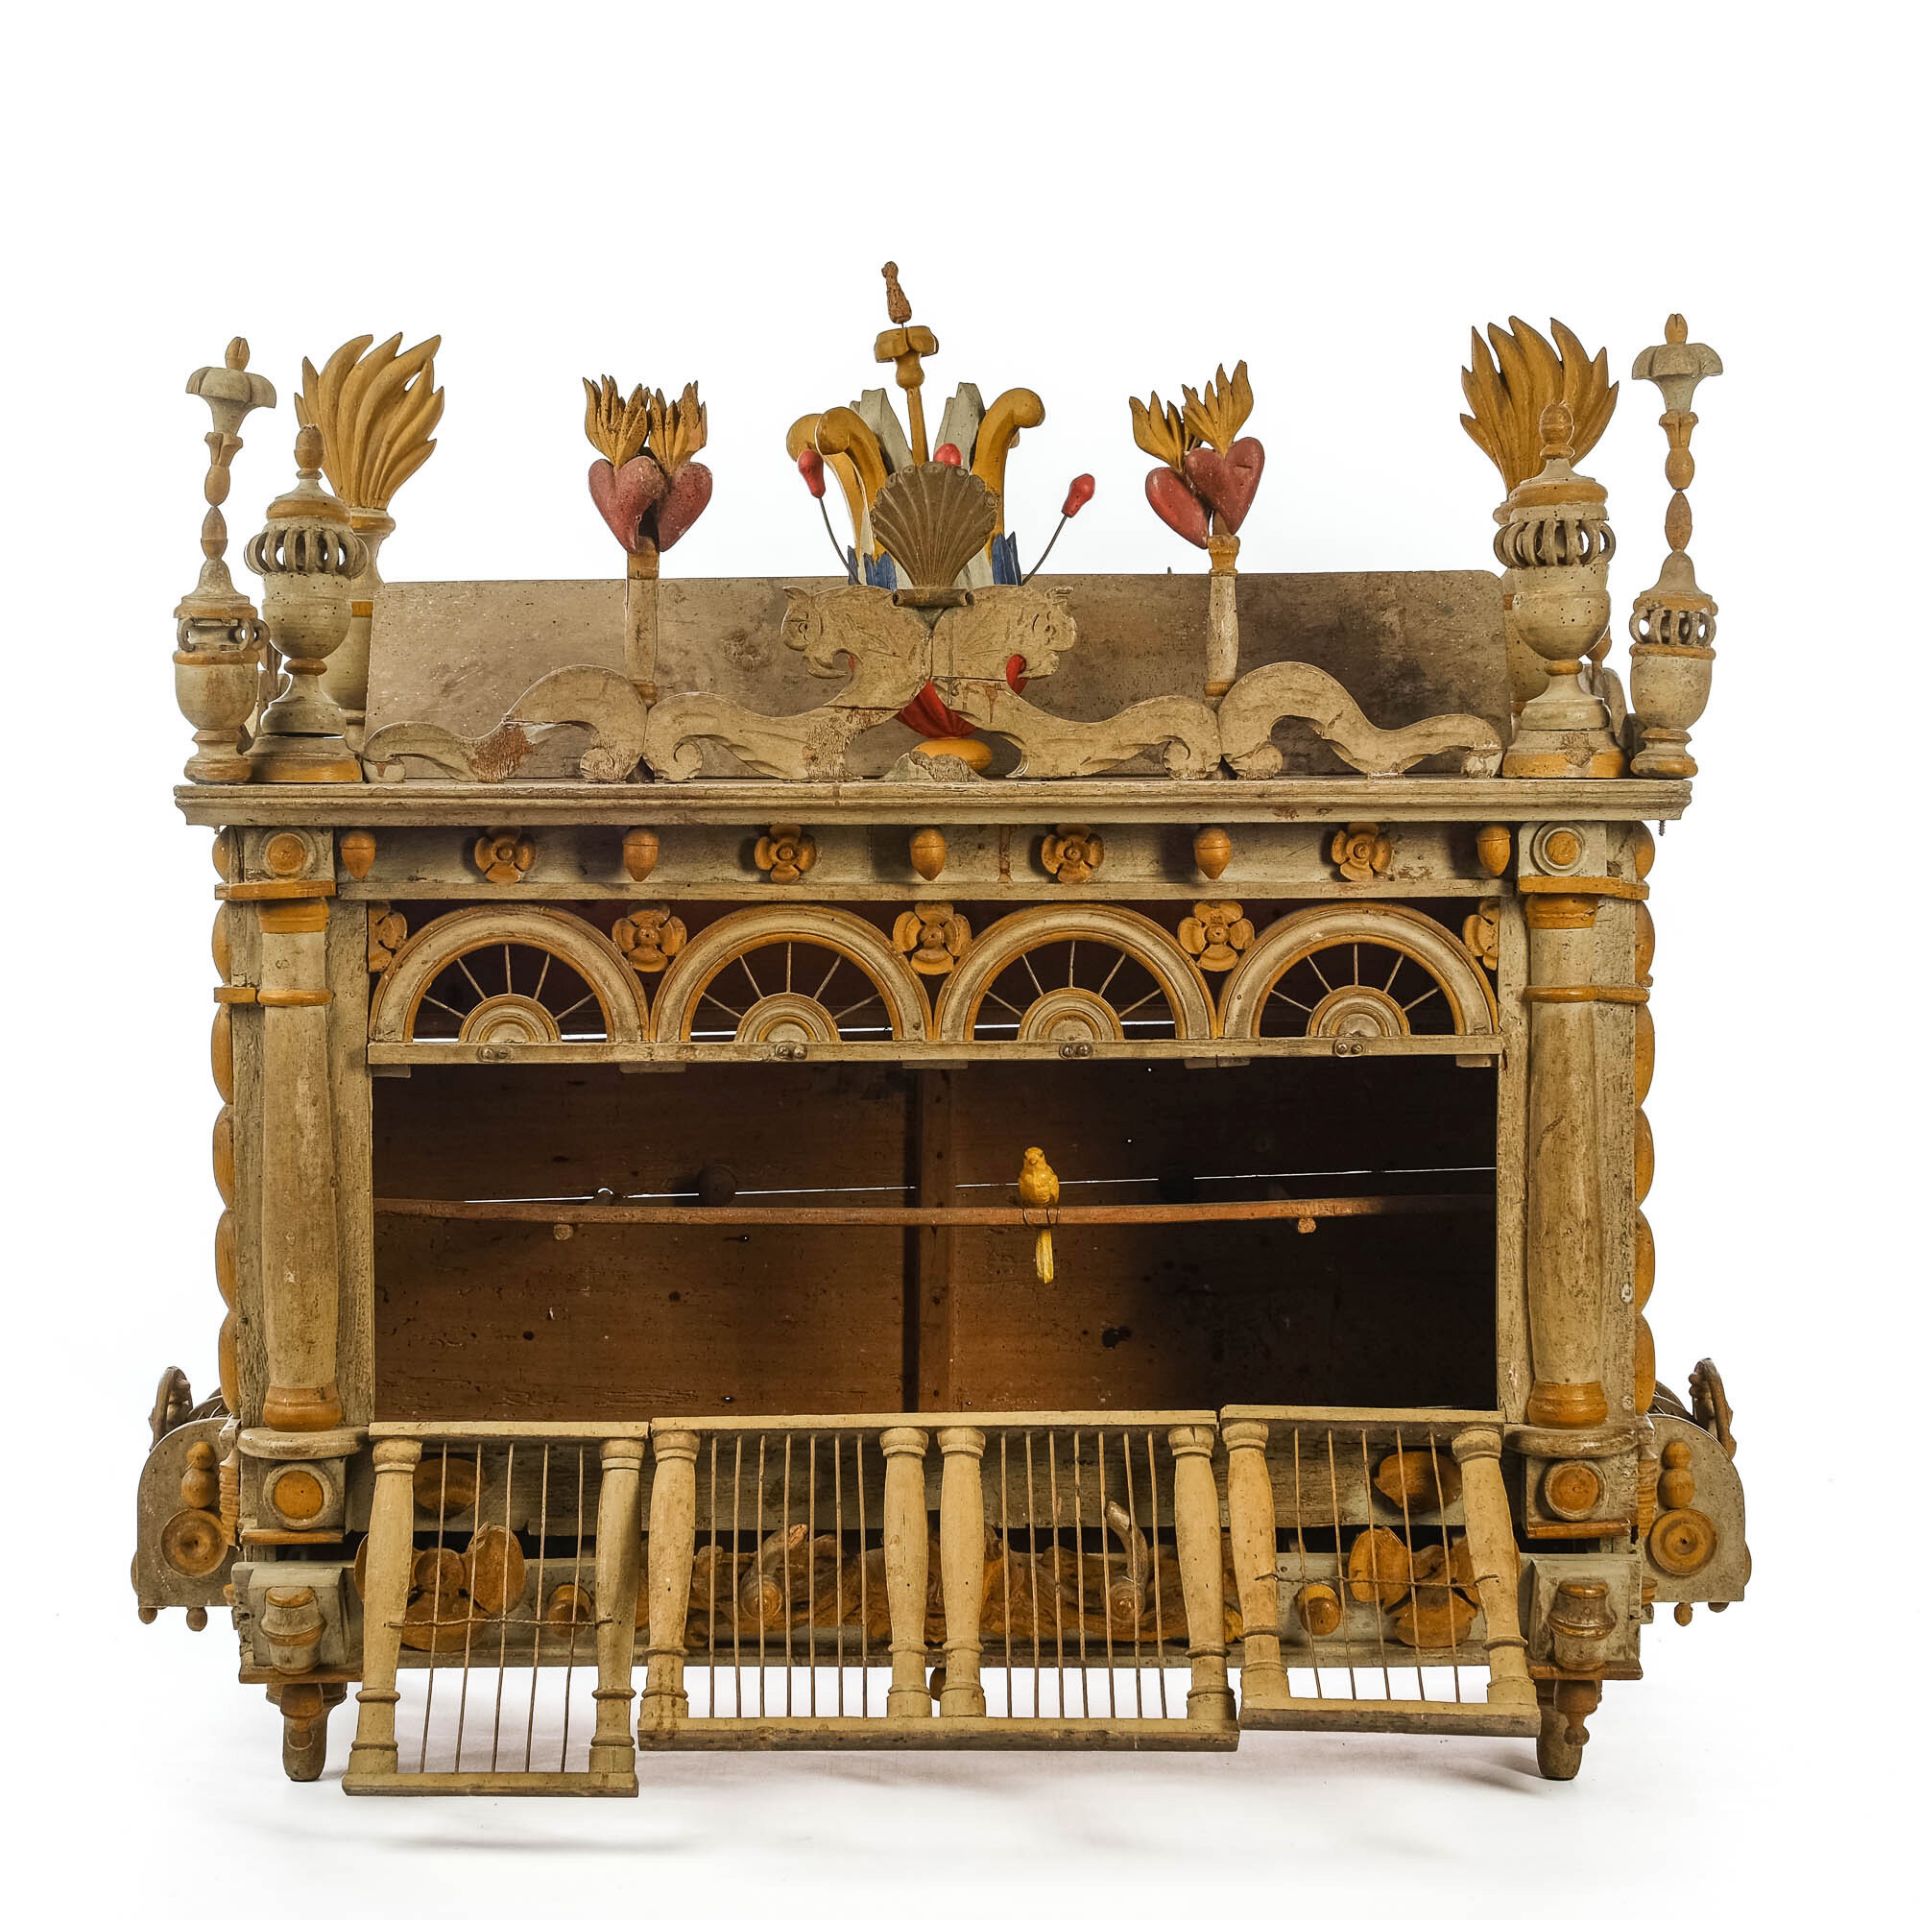 A large painted wooden birdcage, 18/19th C. - Image 6 of 8